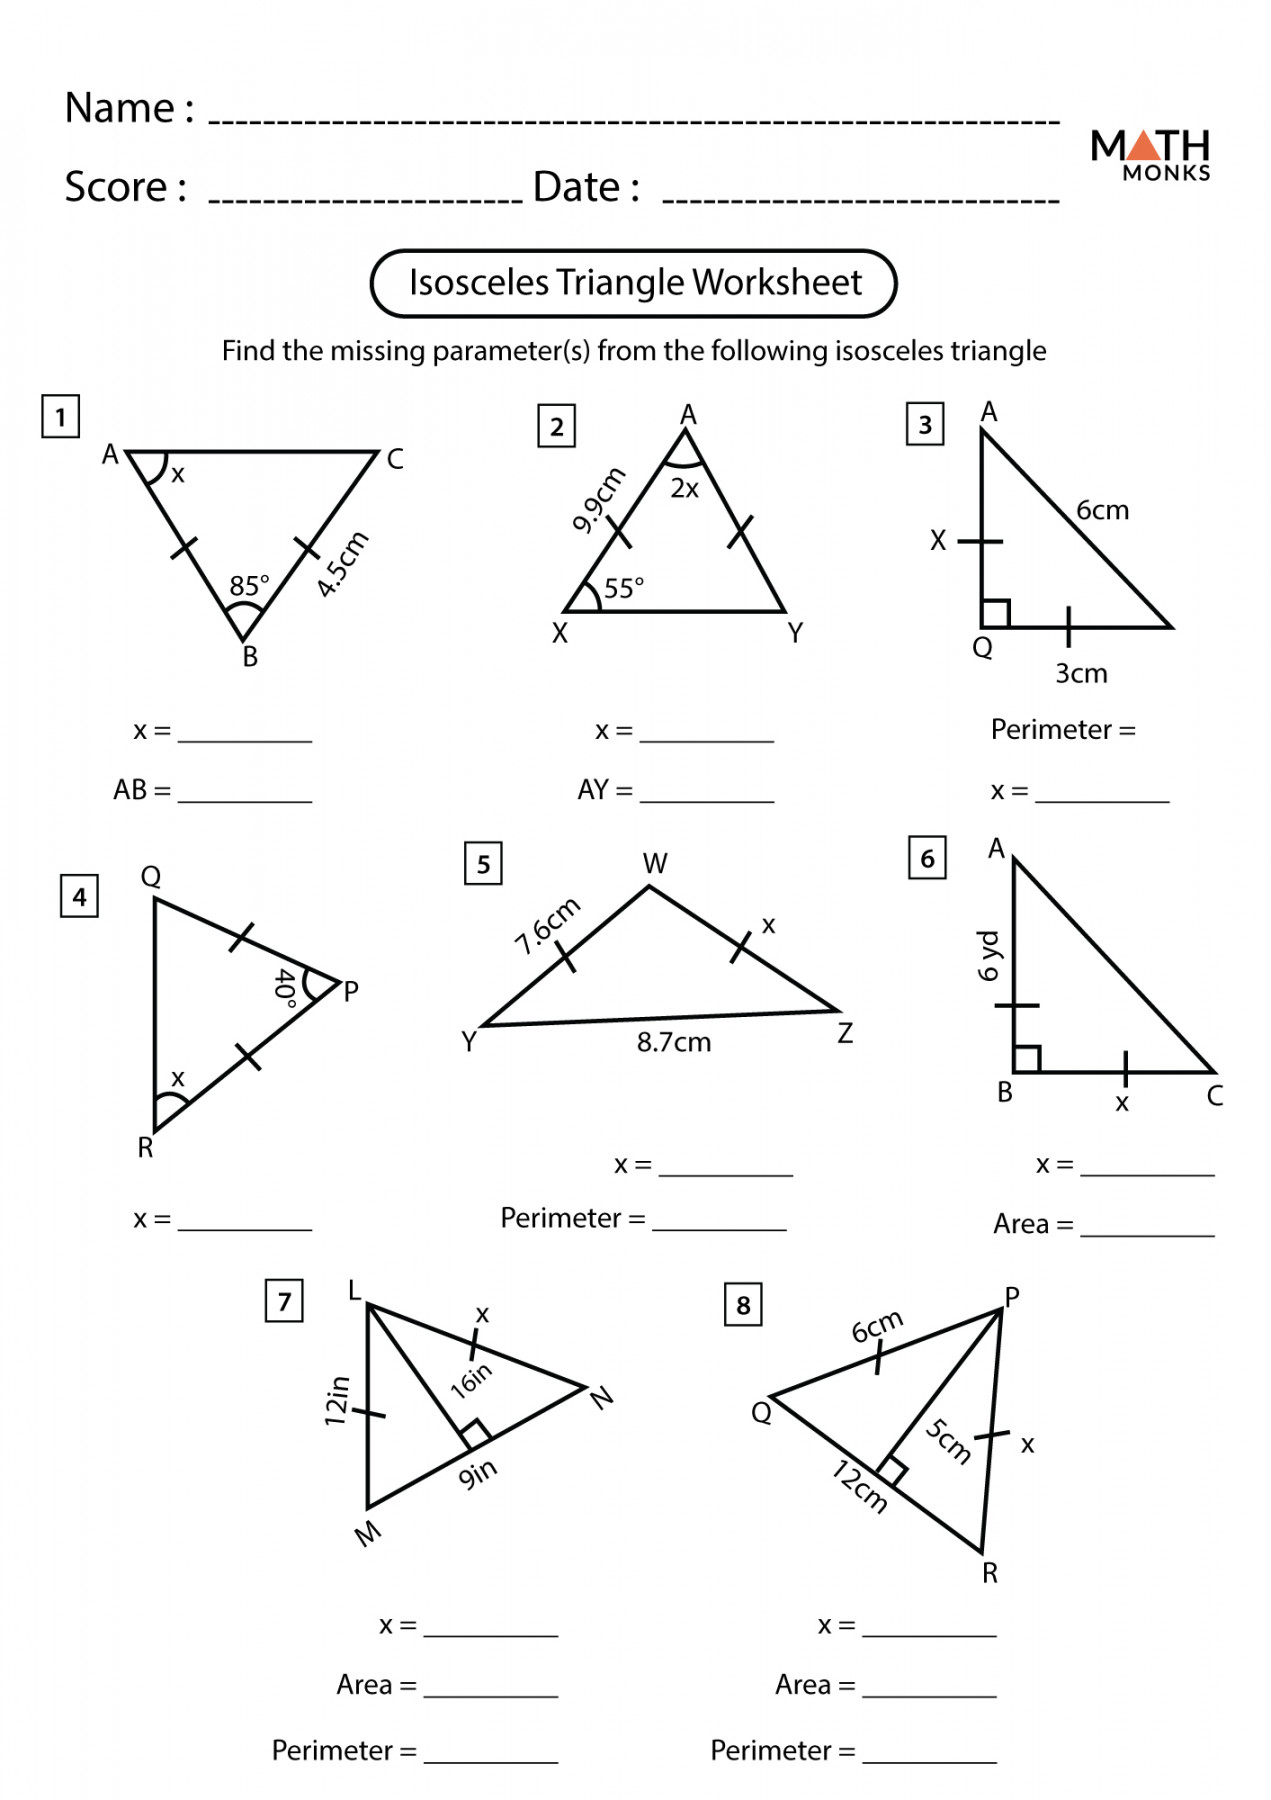 Isosceles and Equilateral Triangles Worksheets - Math Monks